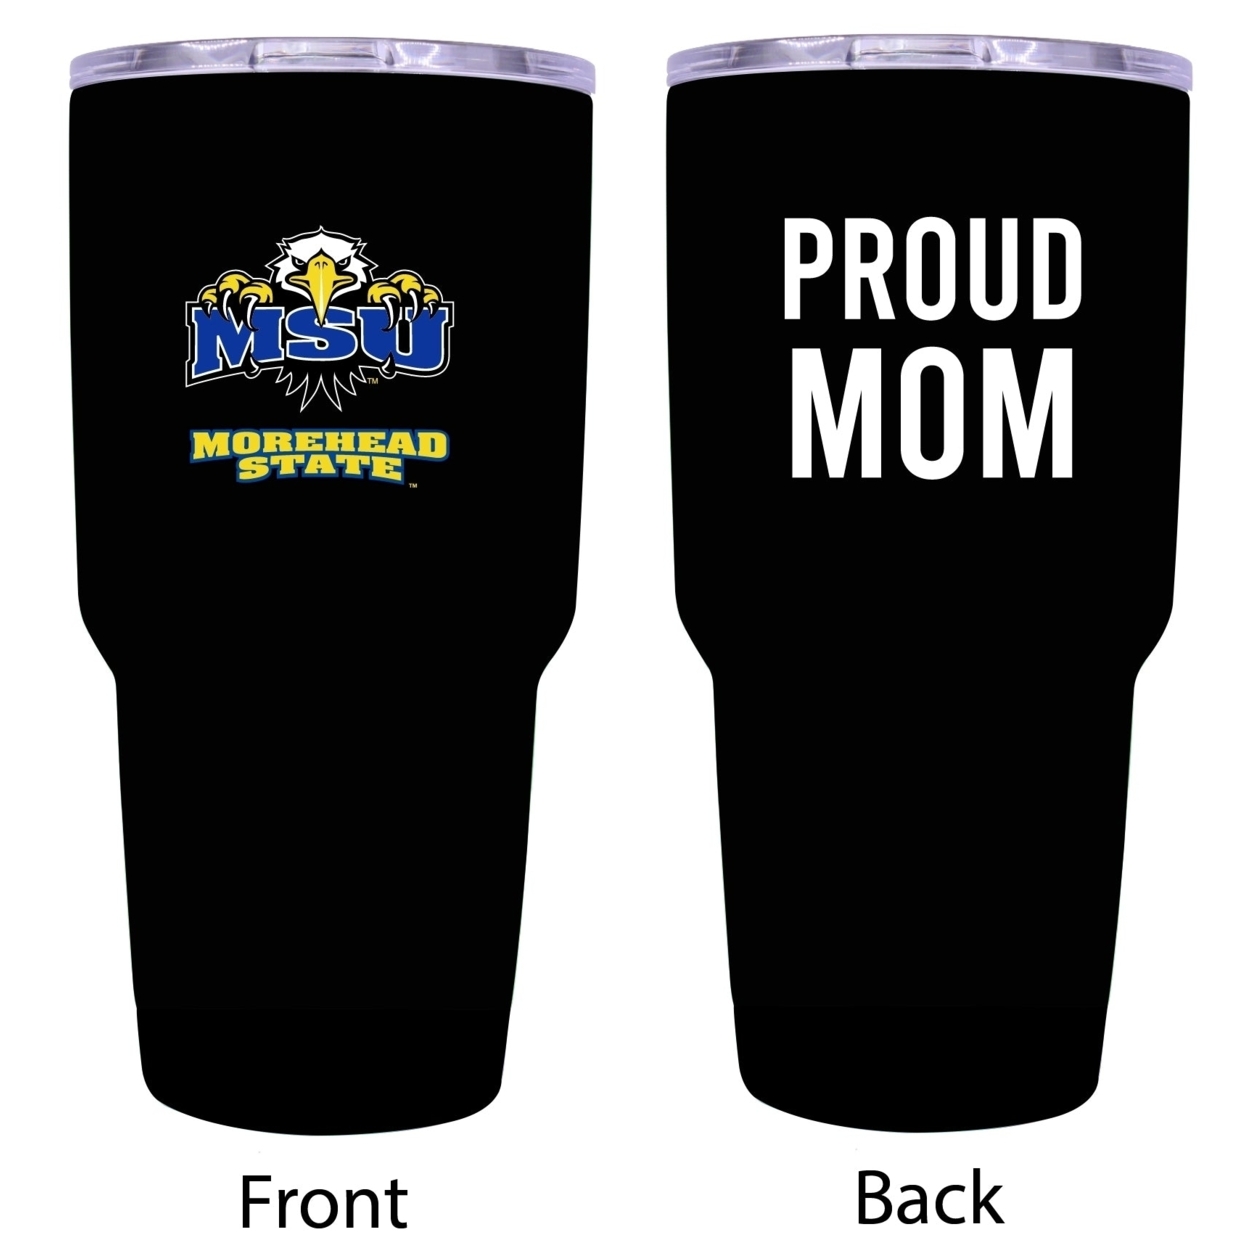 R And R Imports Morehead State University Proud Mom 24 Oz Insulated Stainless Steel Tumblers Black.